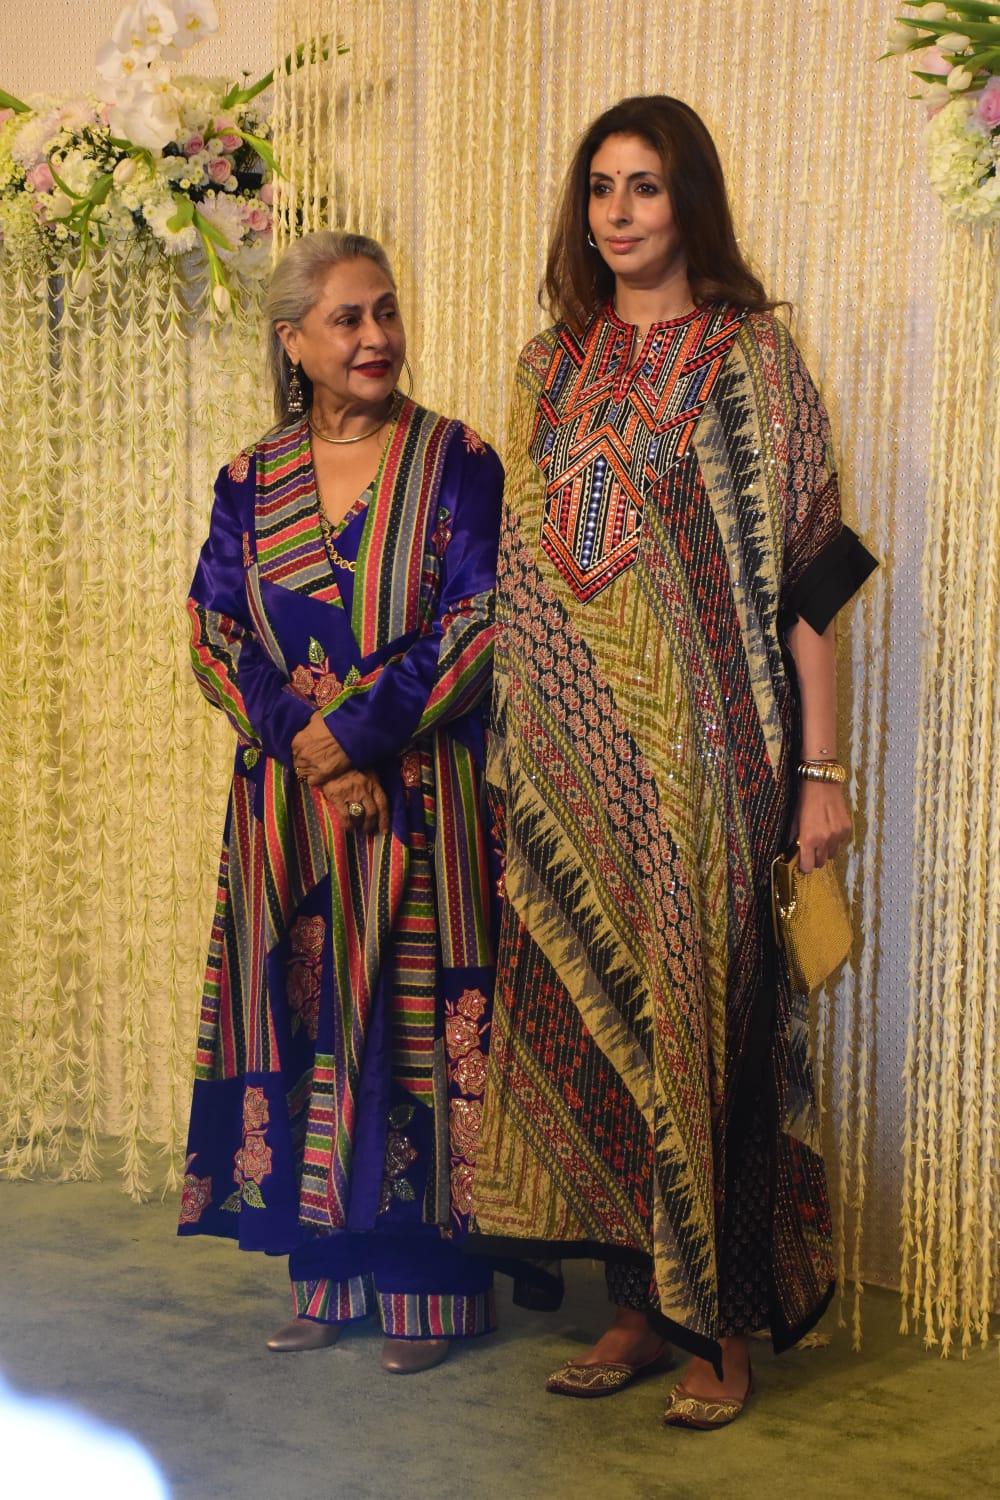 Jaya Bachchan, who arrived with her daughter Shweta Bachchan, stole the show yet again with her conversation with the paparazzi